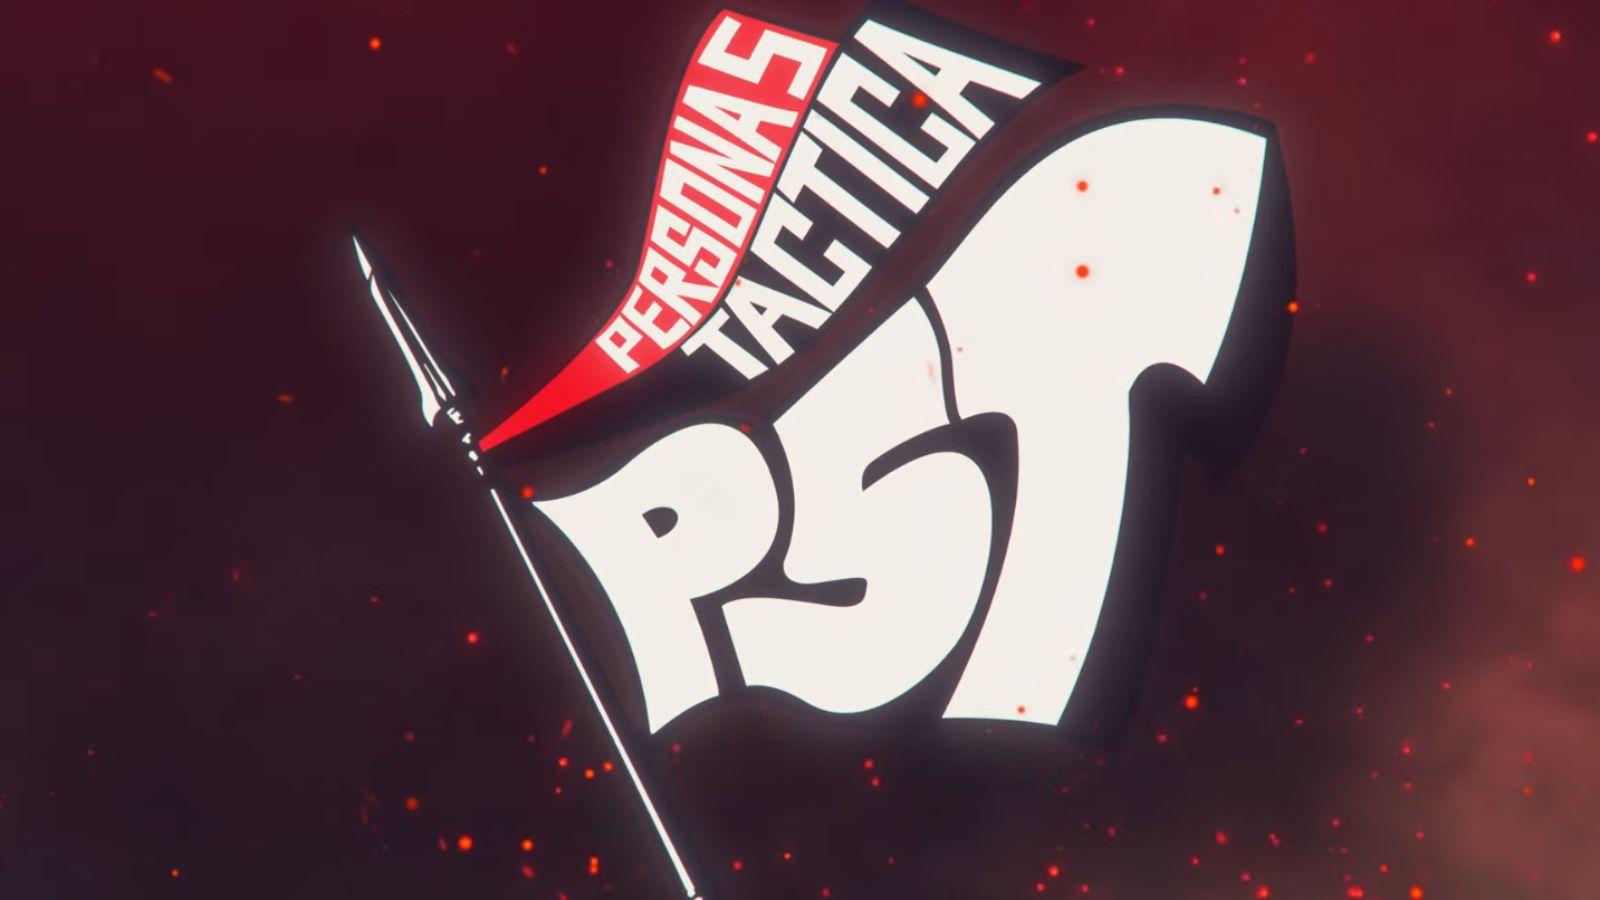 Persona 5 Tactica Preview - The Spin-Off We Never Saw Coming